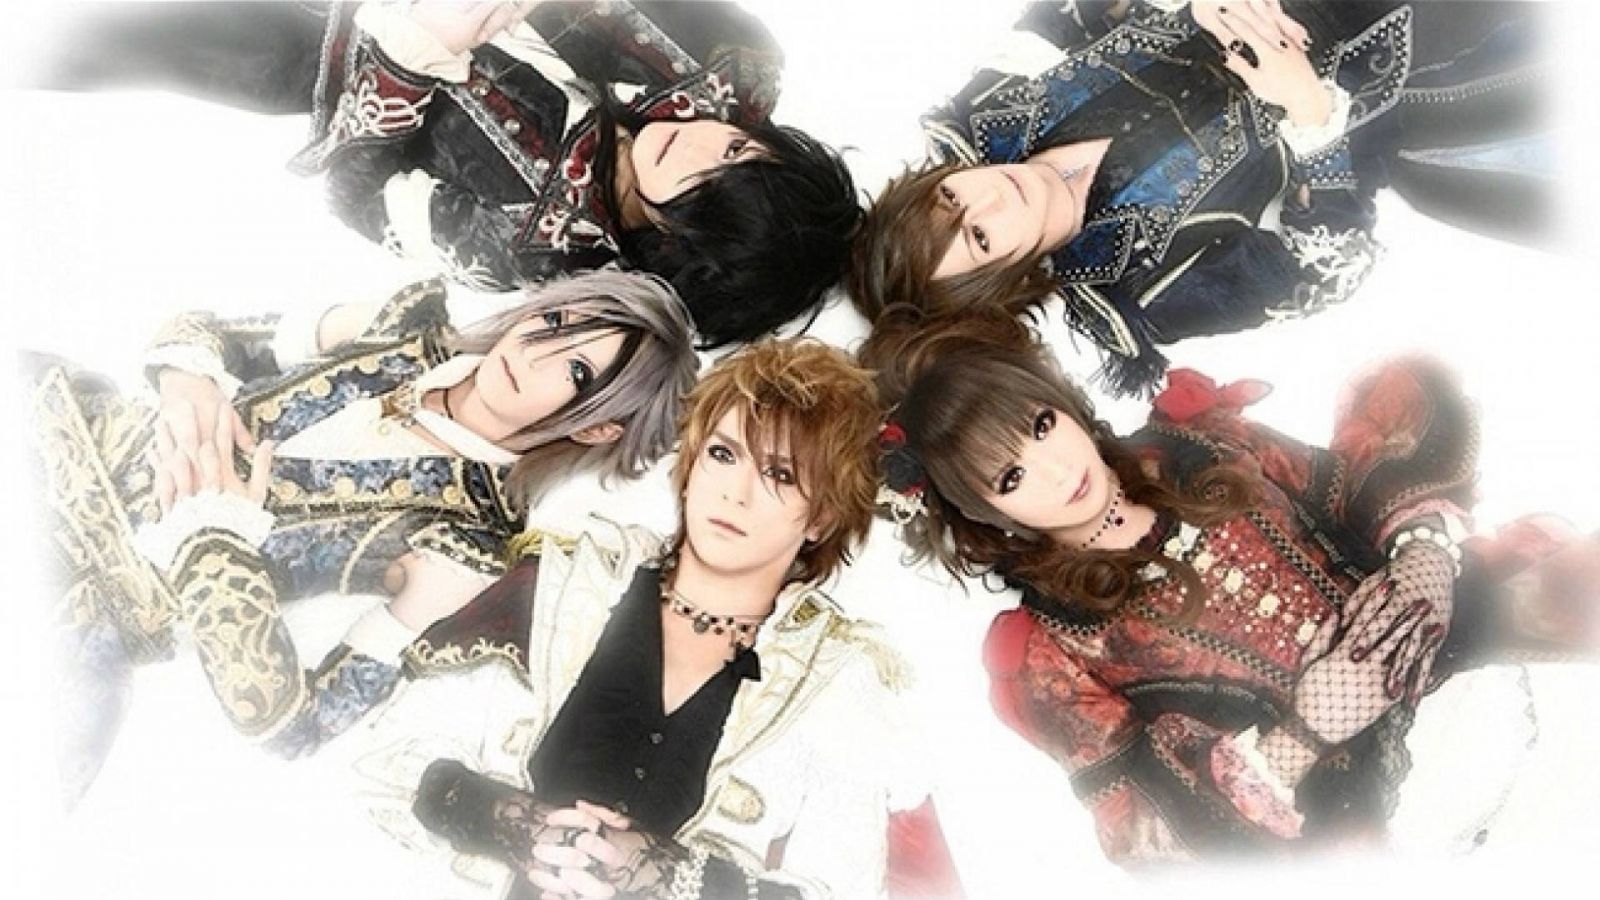 Versailles to Hold 9th Anniversary Live © CHATEAU AGENCY. All Rights Reserved.